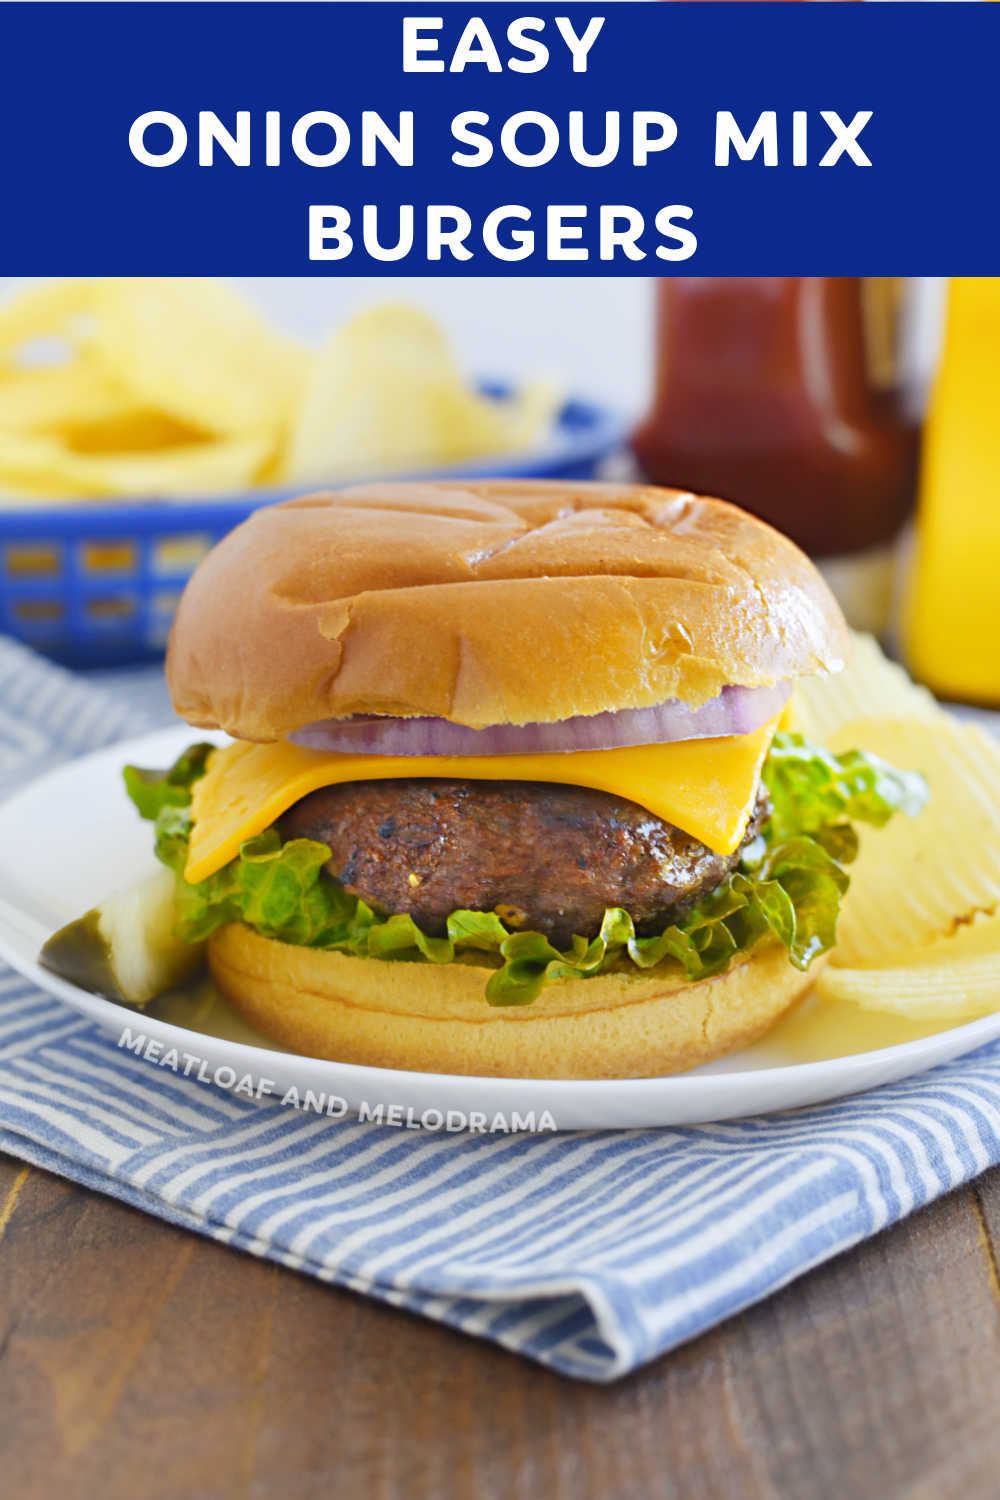 Mom's Onion Soup Mix Burgers made with Lipton soup mix are juicy, flavorful and delicious. You only need 3 ingredients for this easy, budget-friendly recipe to make some of the best burgers on the planet! via @meamel